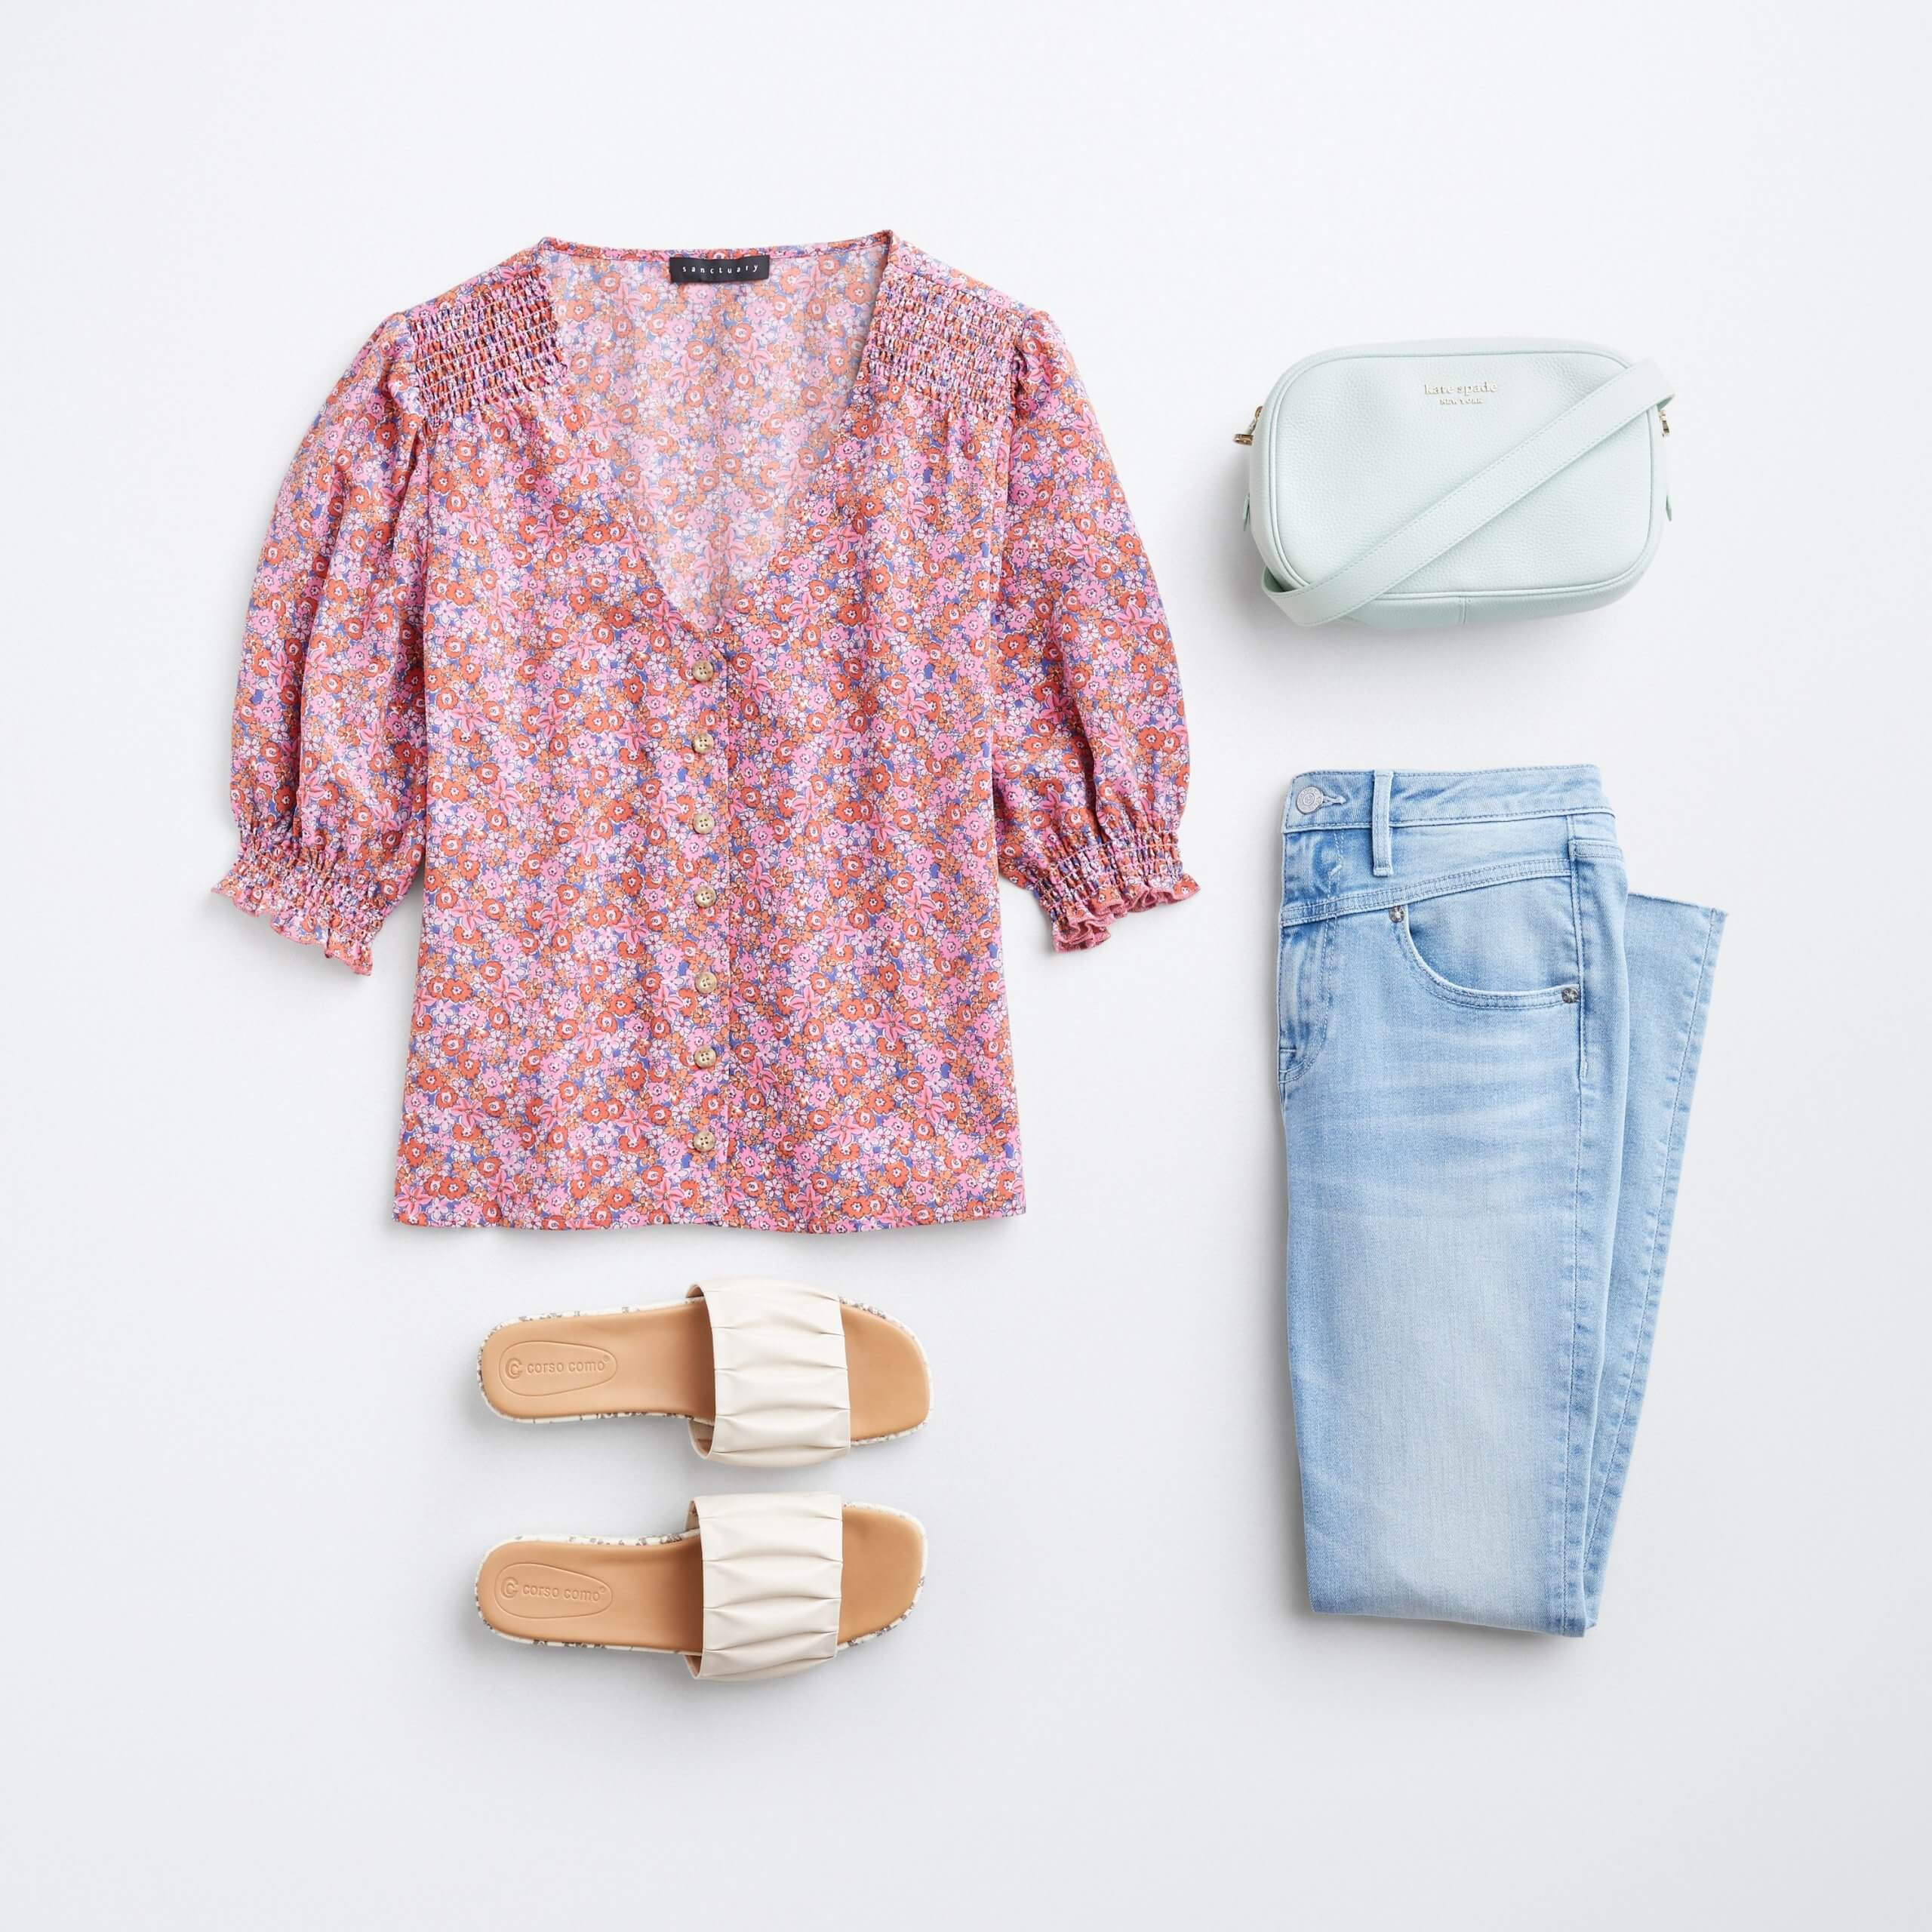 Stitch Fix Women’s outfit laydown featuring multi-colored floral print top with mint green crossbody bag, light blue jeans and white slide sandals.